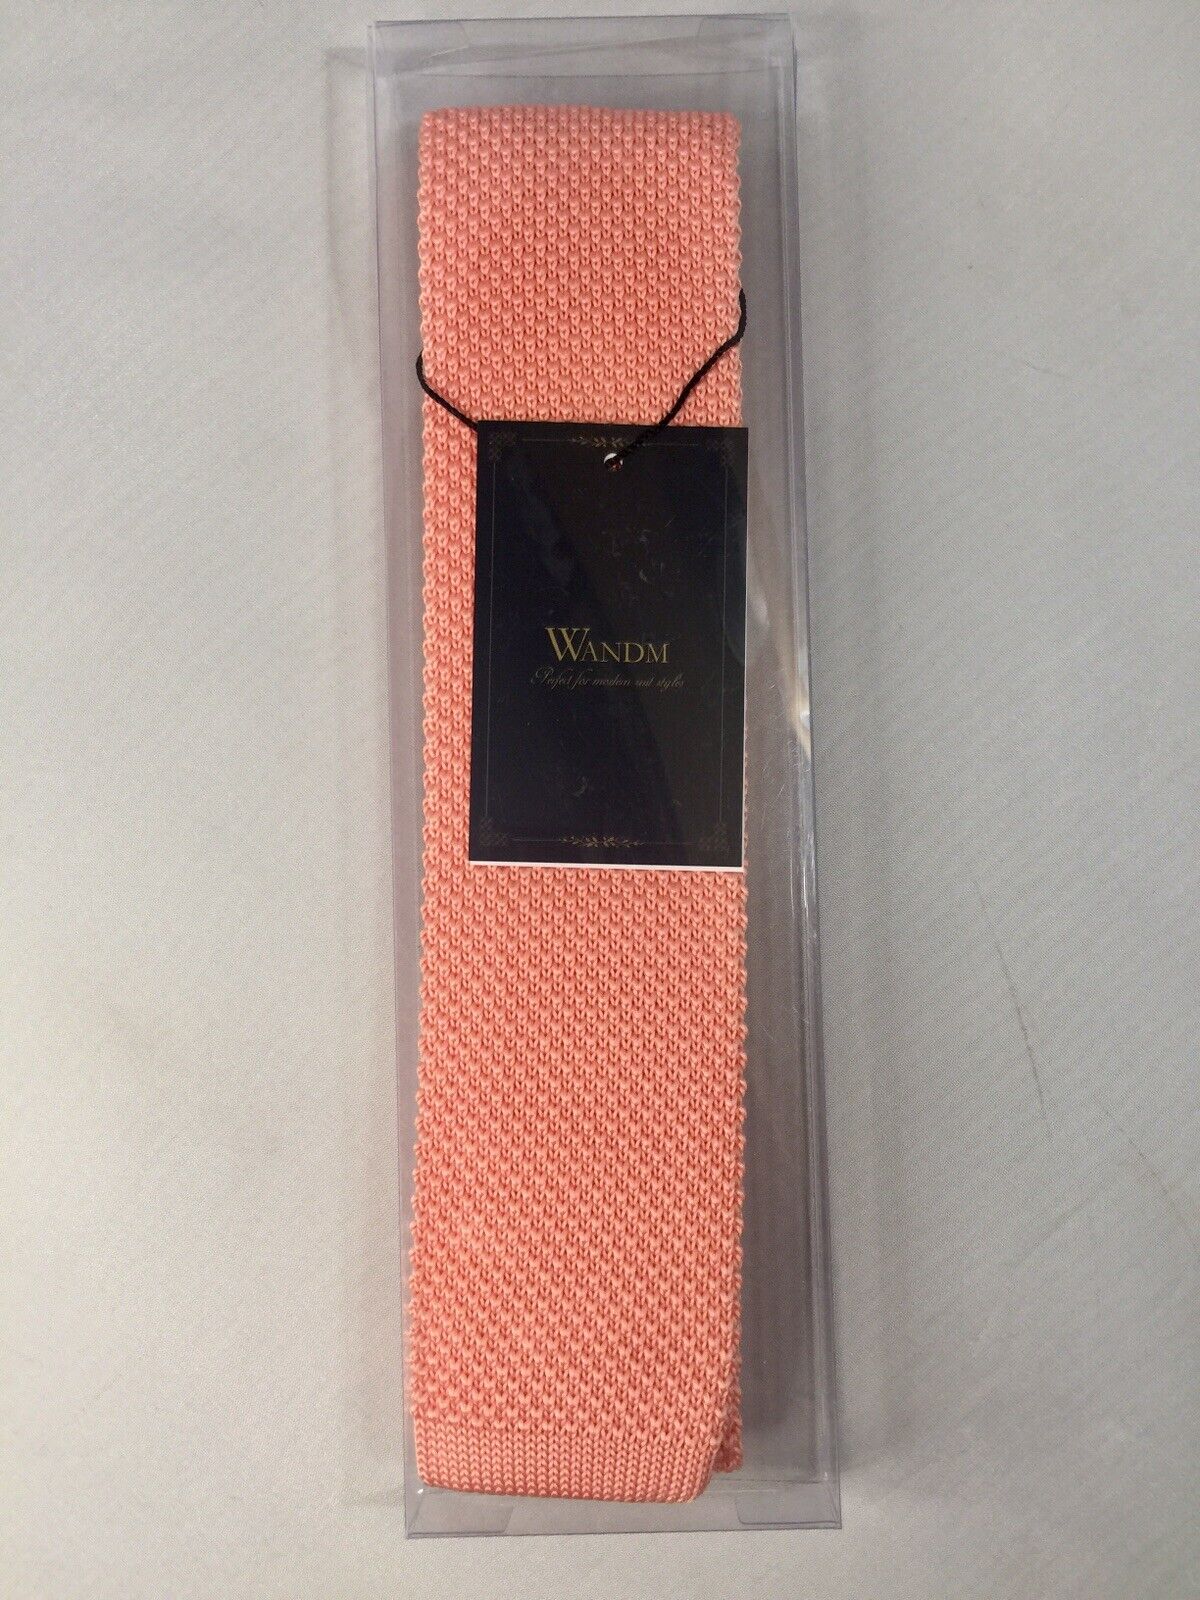 NEW NWT WANDM Men\'s Knit Slim Tie Solid Color Coral Pink